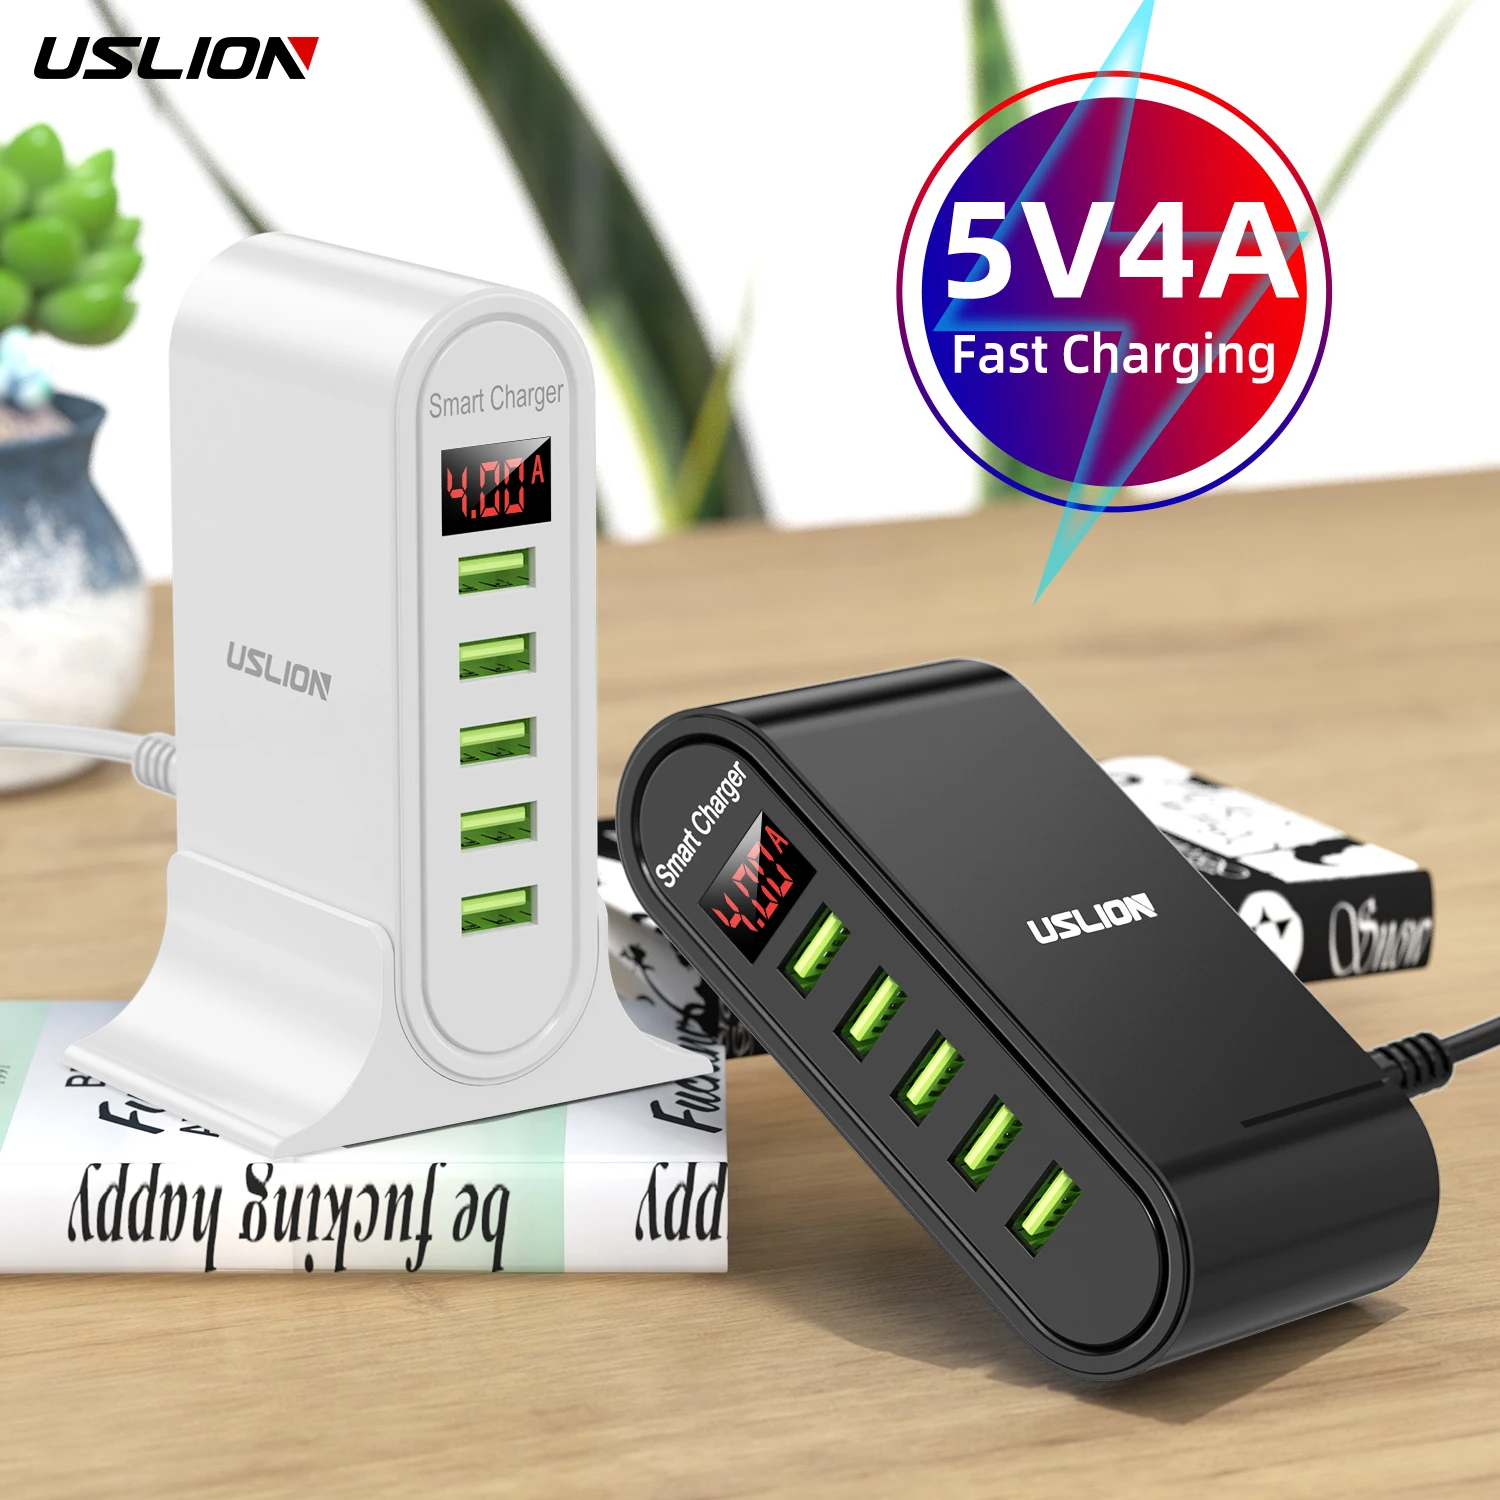 

Free Shipping USLION Adapter Charger QC 3.0 Fast Charging for iPhone Mobile Phone Wall Charger EU Plug Adapter, Black/white